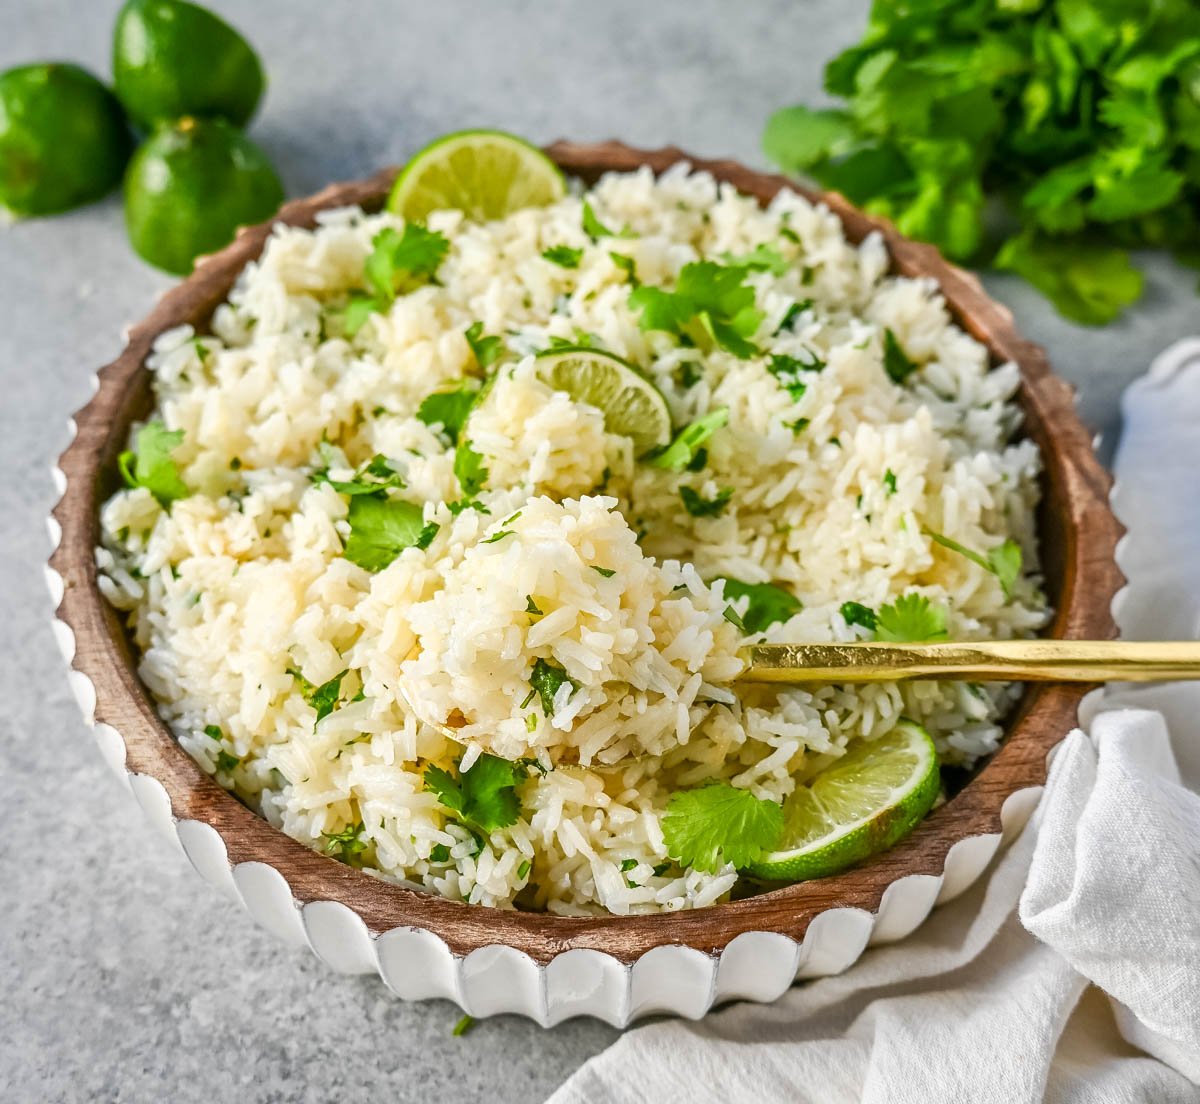 How to make the best homemade cilantro lime rice at home. This fluffy and flavorful cilantro lime rice is the perfect Mexican side dish recipe.